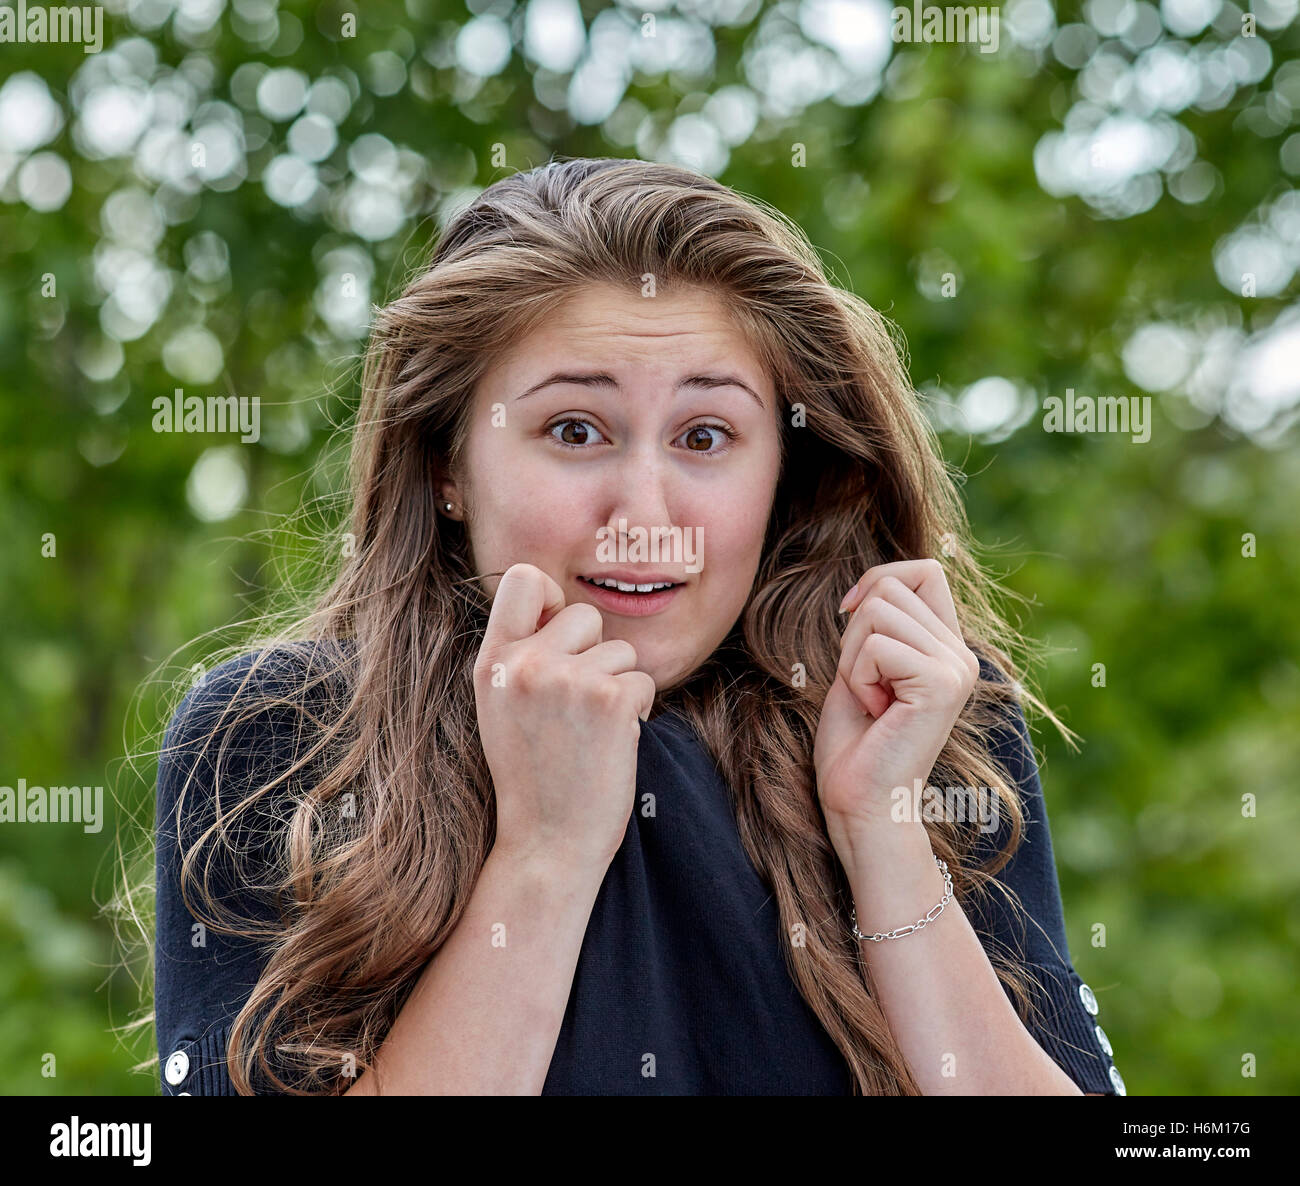 Scared and Frightened young woman with long hair Stock Photo